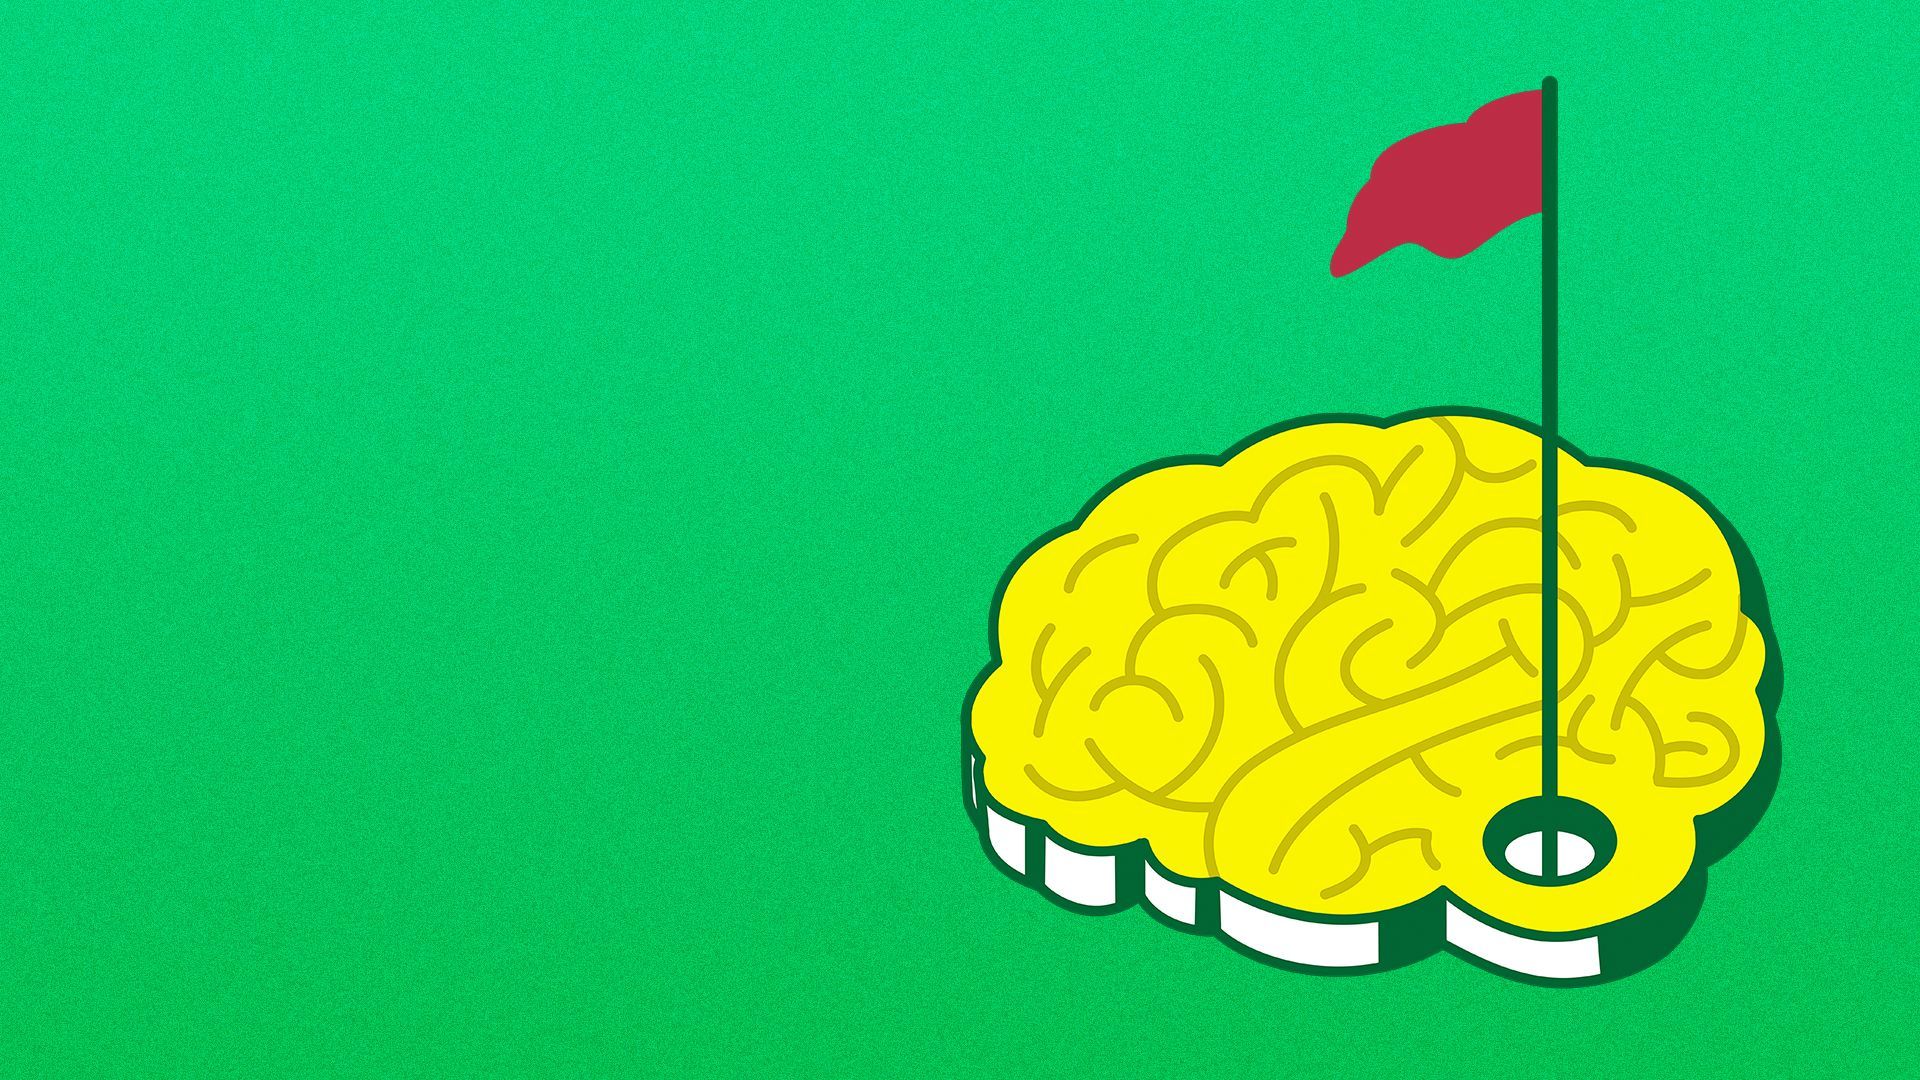 Illustration of a logo resembling the Masters logo, with a brain instead of the United States